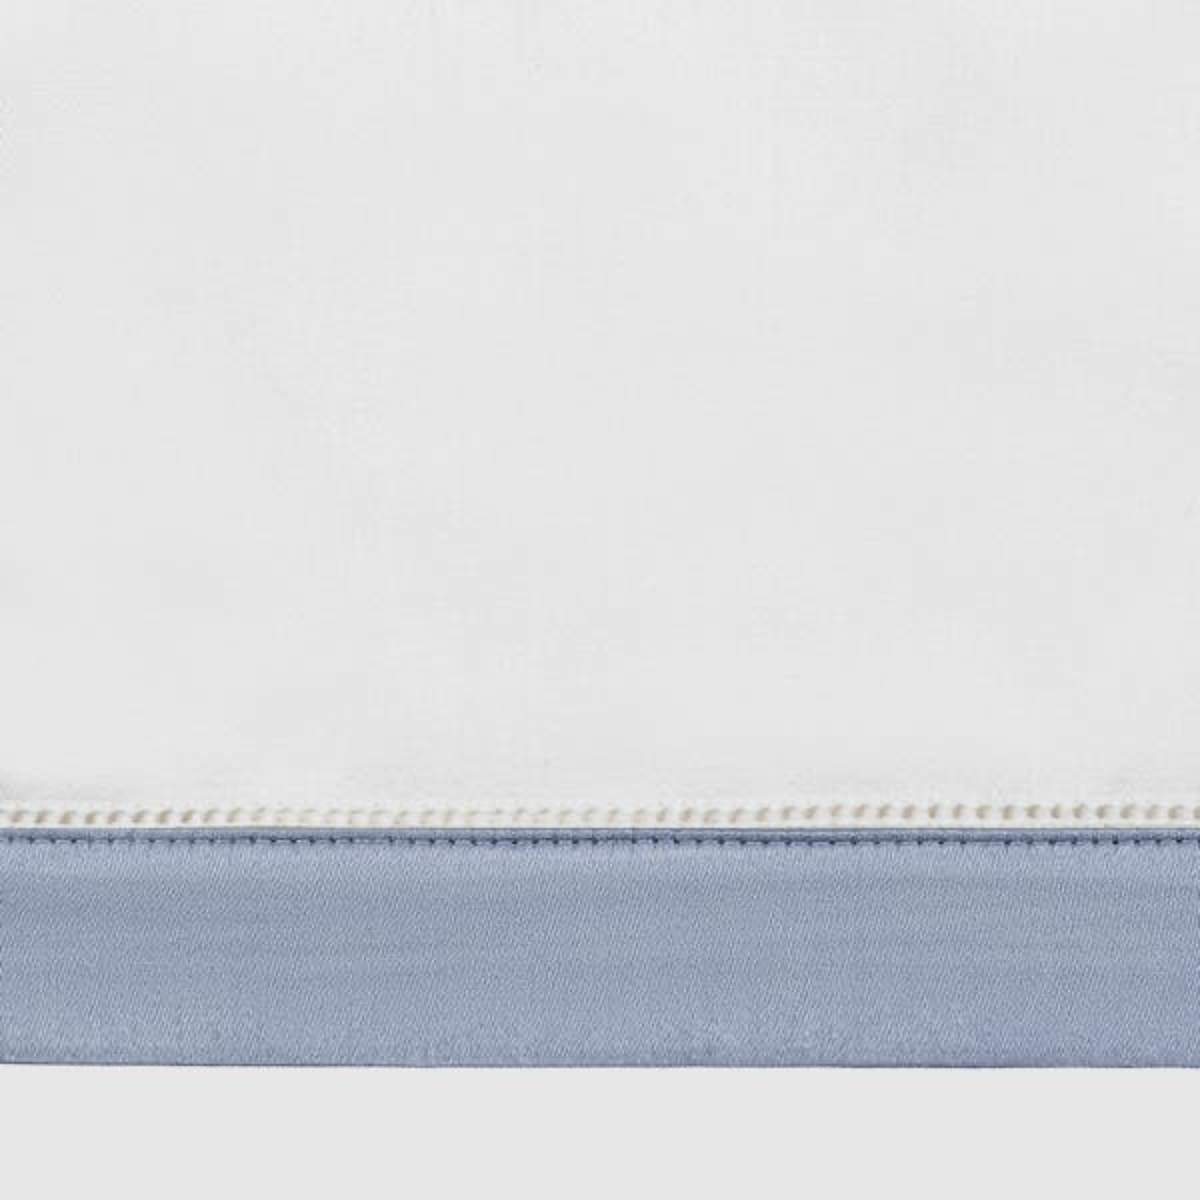 Detail Closeup of Matouk Ambrose Bedding Swatch in Hazy Blue Color